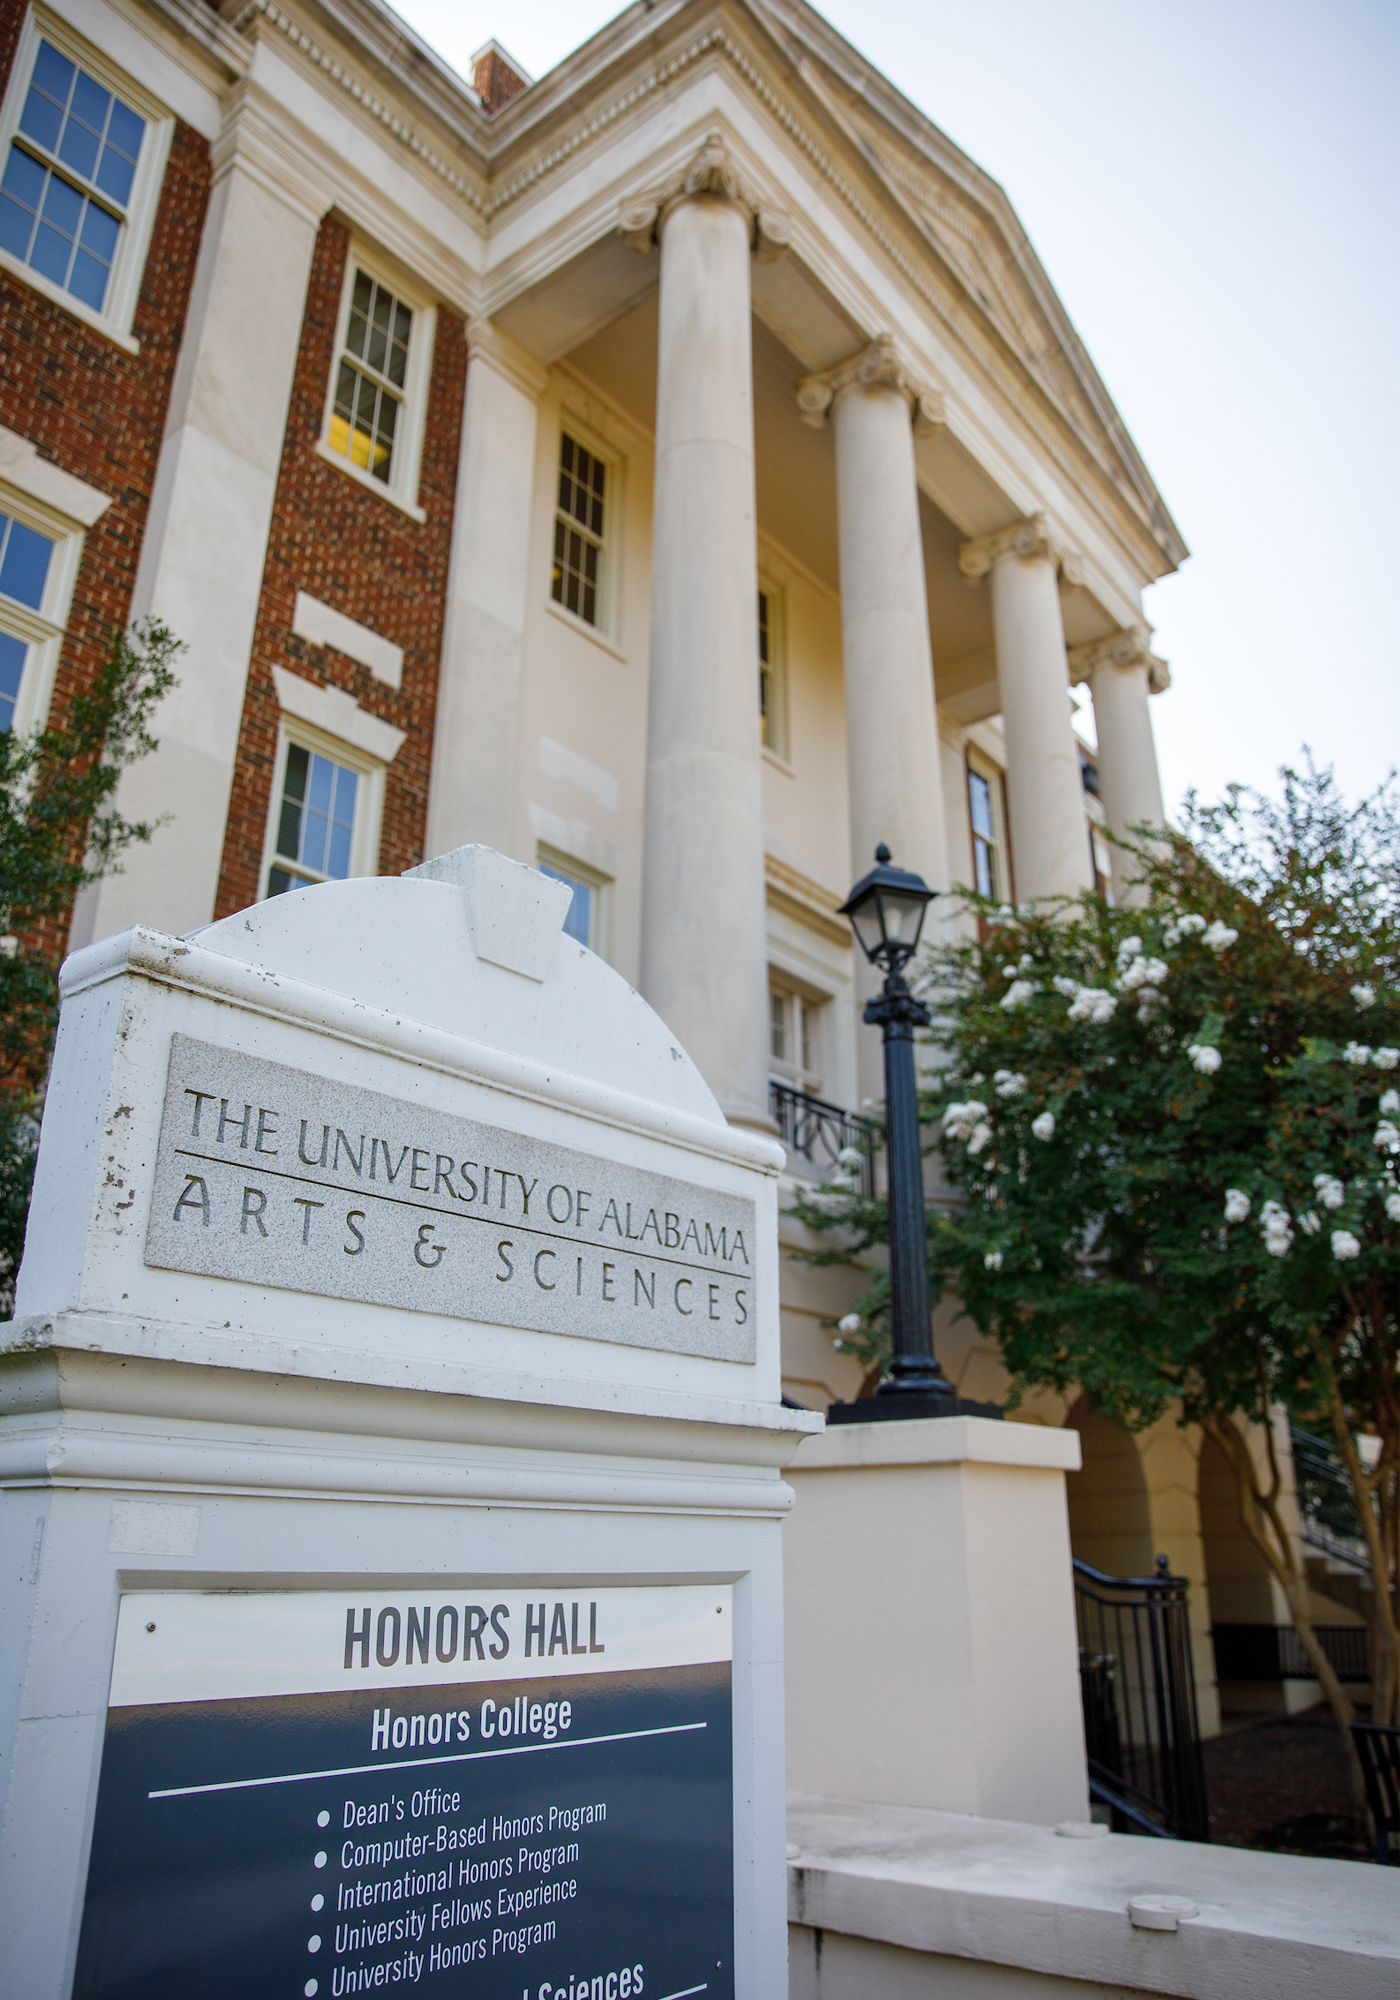 UA Starts Search for New Honors College Dean honors.ua.edu The